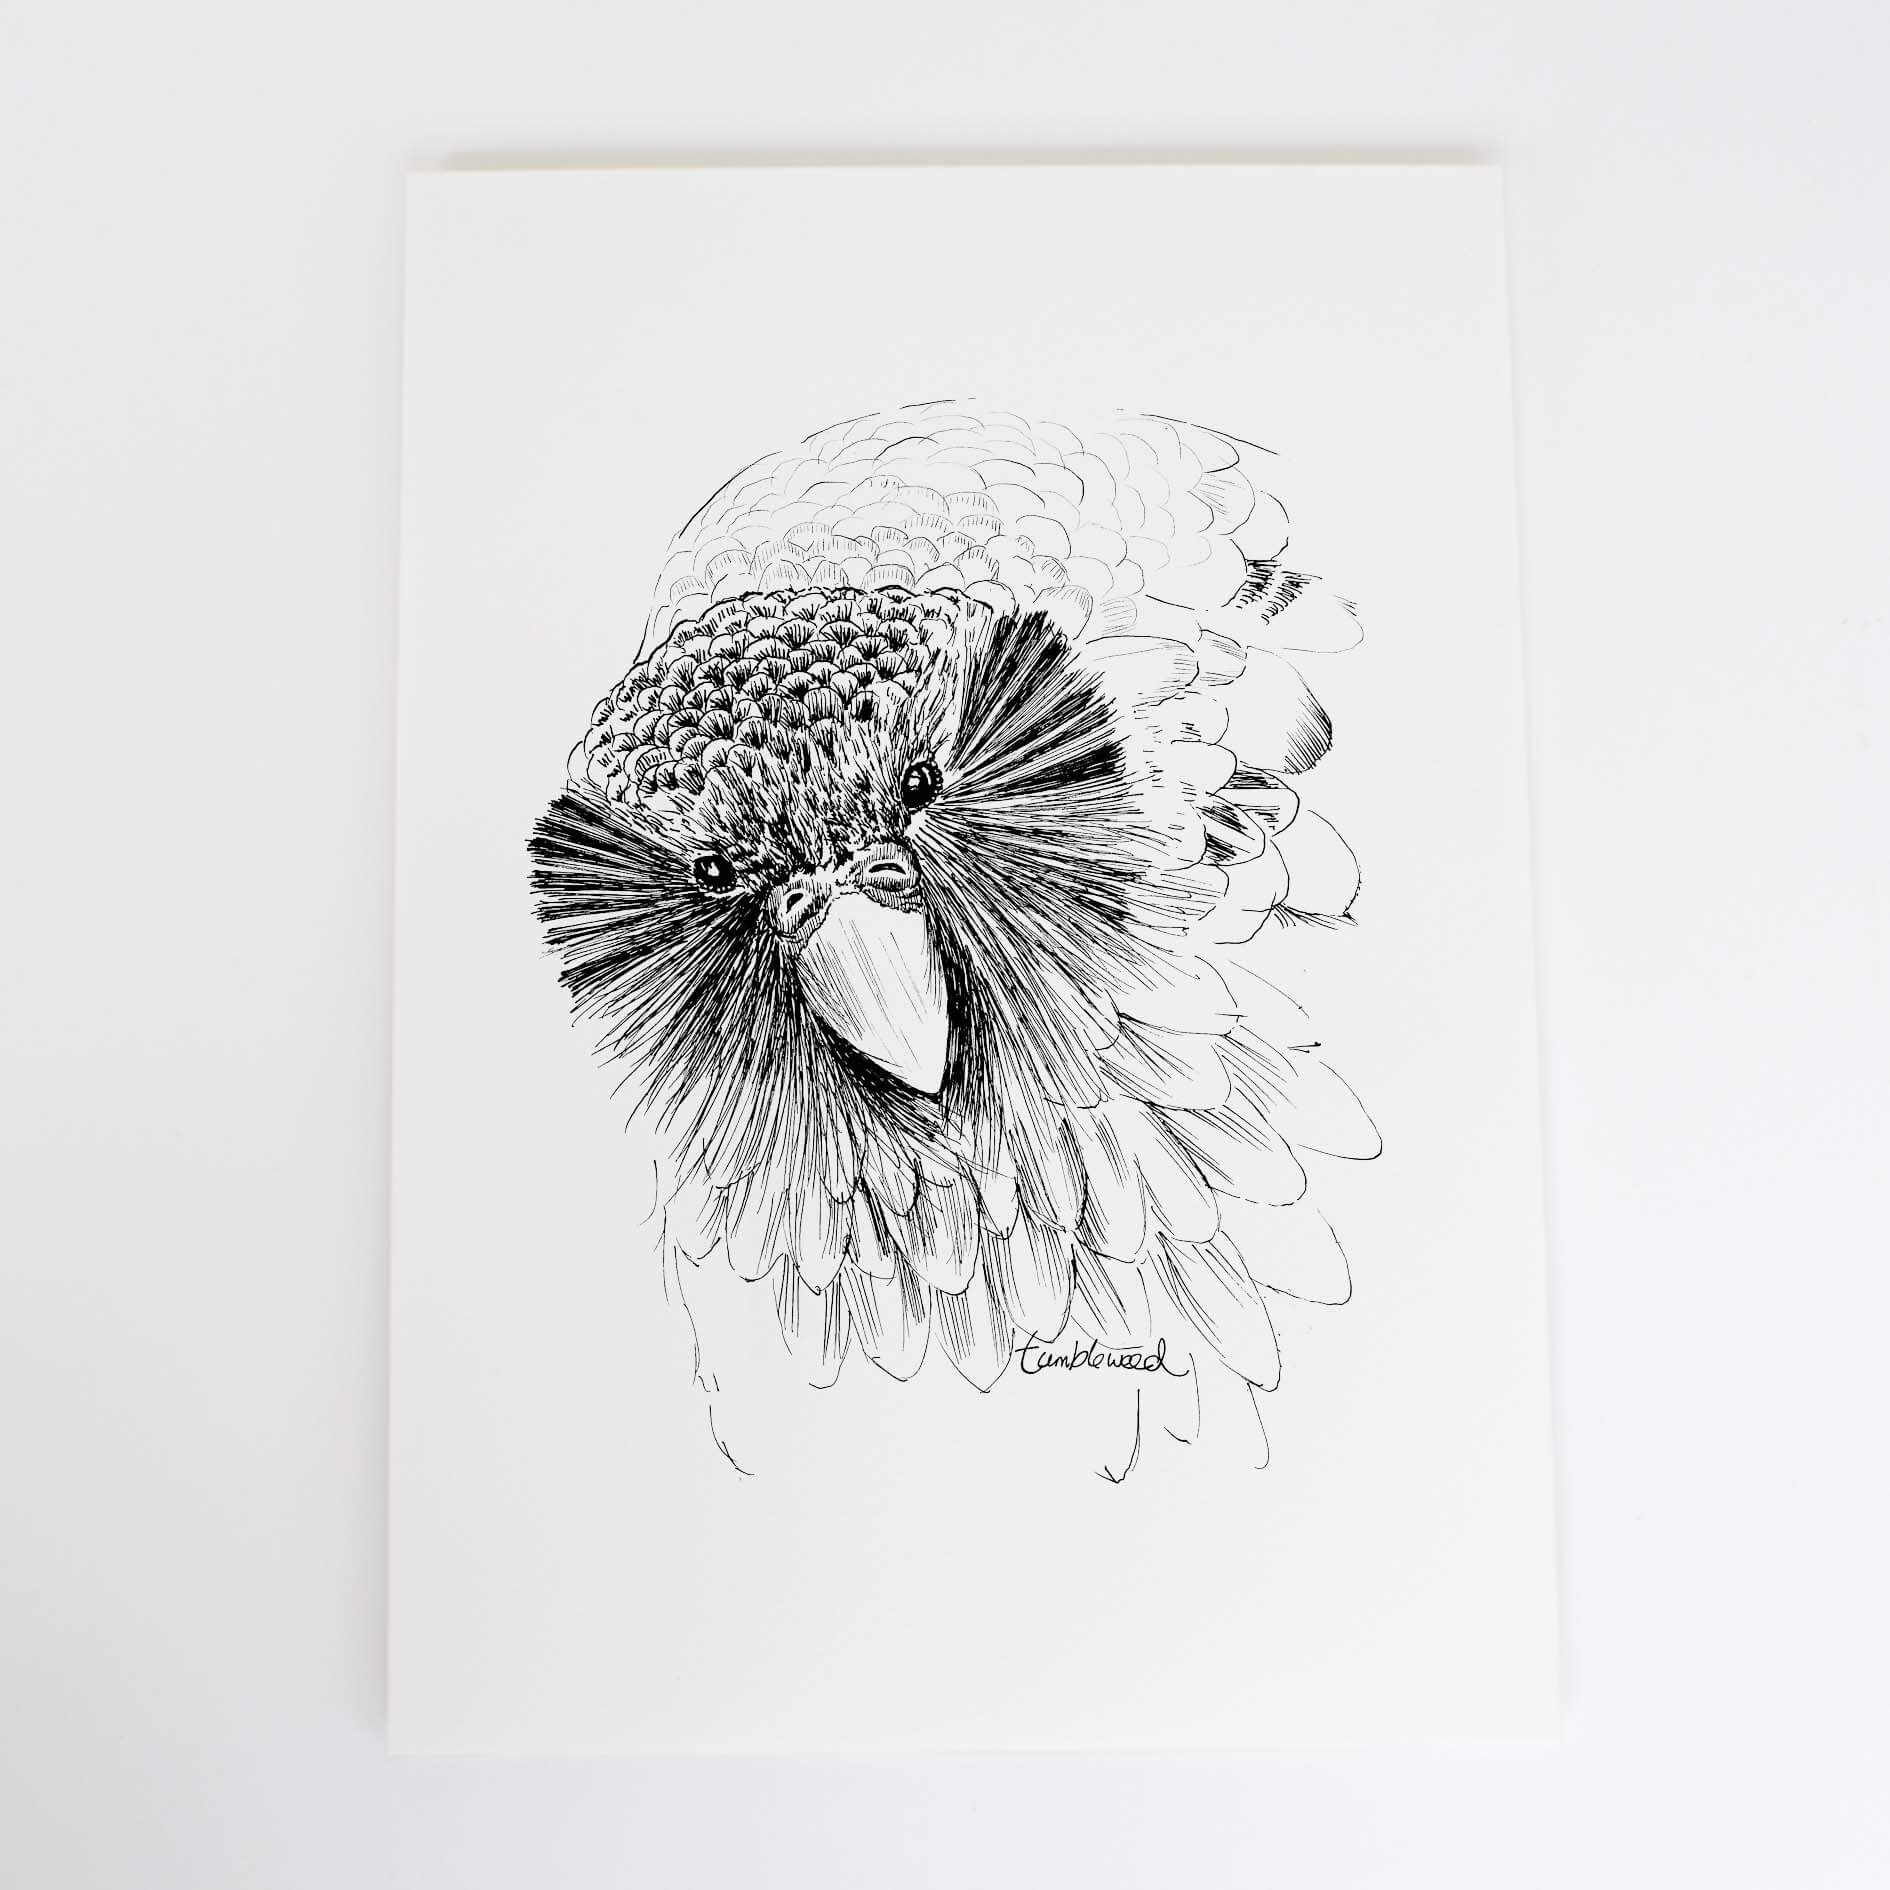 A4 art print of featuring Sirocco the Kākāpō design on white archival paper.